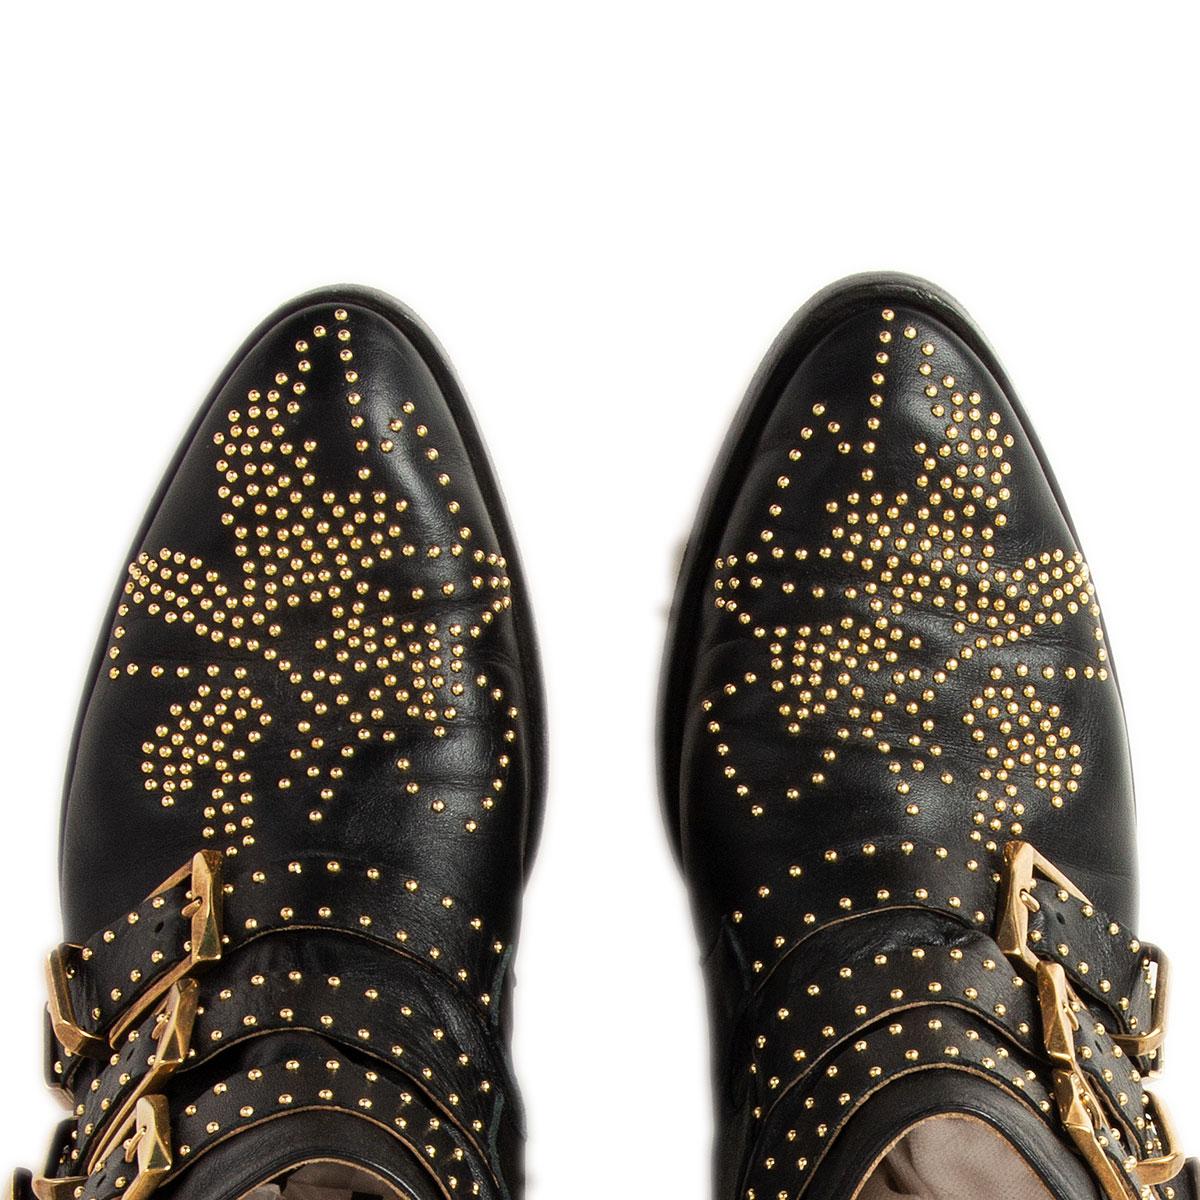 CHLOE black leather STUDDED SUSANNA Ankle Boots Shoes 37 For Sale 2